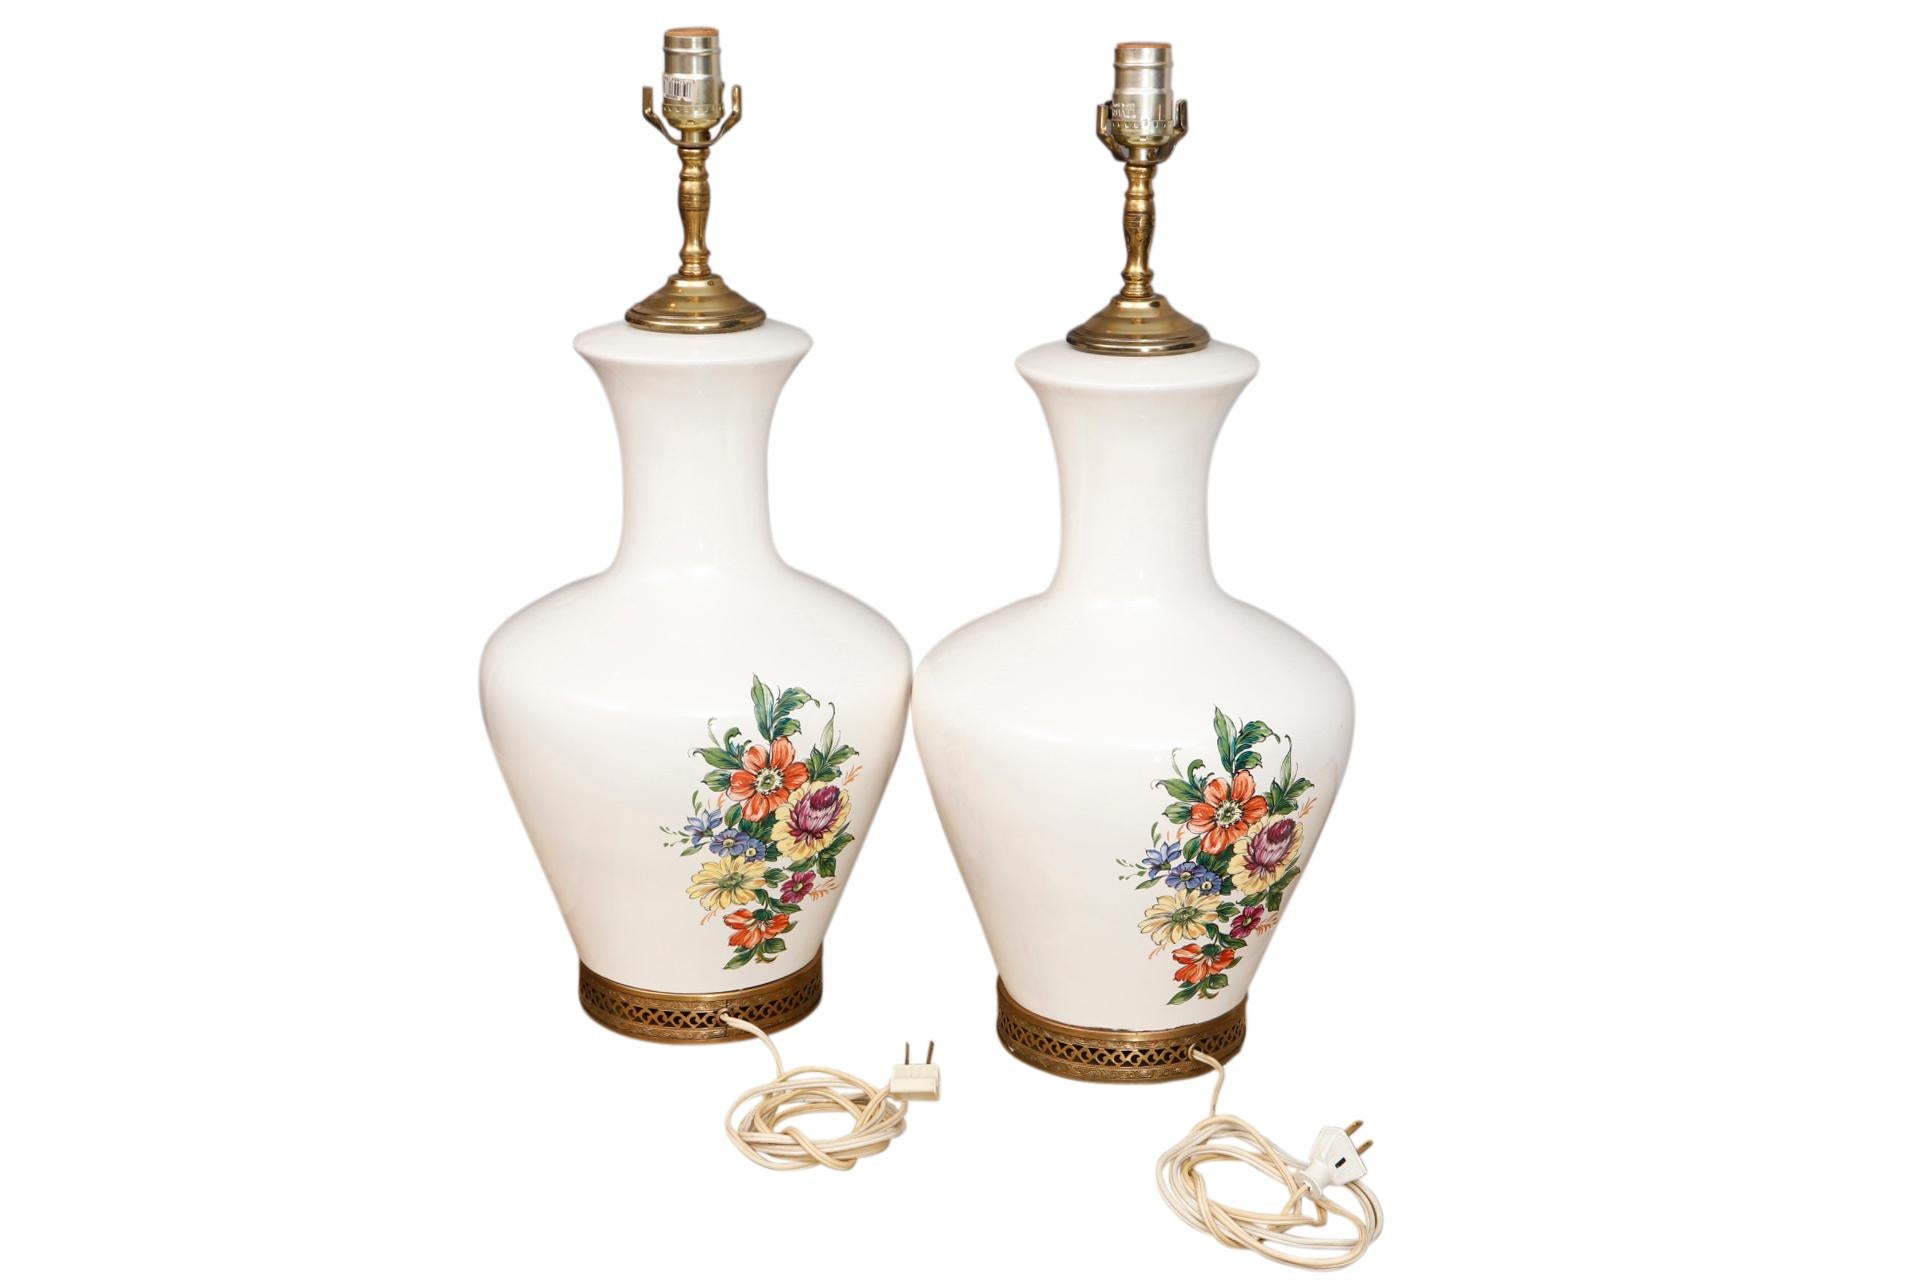 A pair of white floral table lamps. Simple ceramic white vases with slender necks and a wide vase are decorated with a delicate floral motif in blush, indigo & lilac, finished with an ornamental pierced brass base. Wired and working. Dimensions per